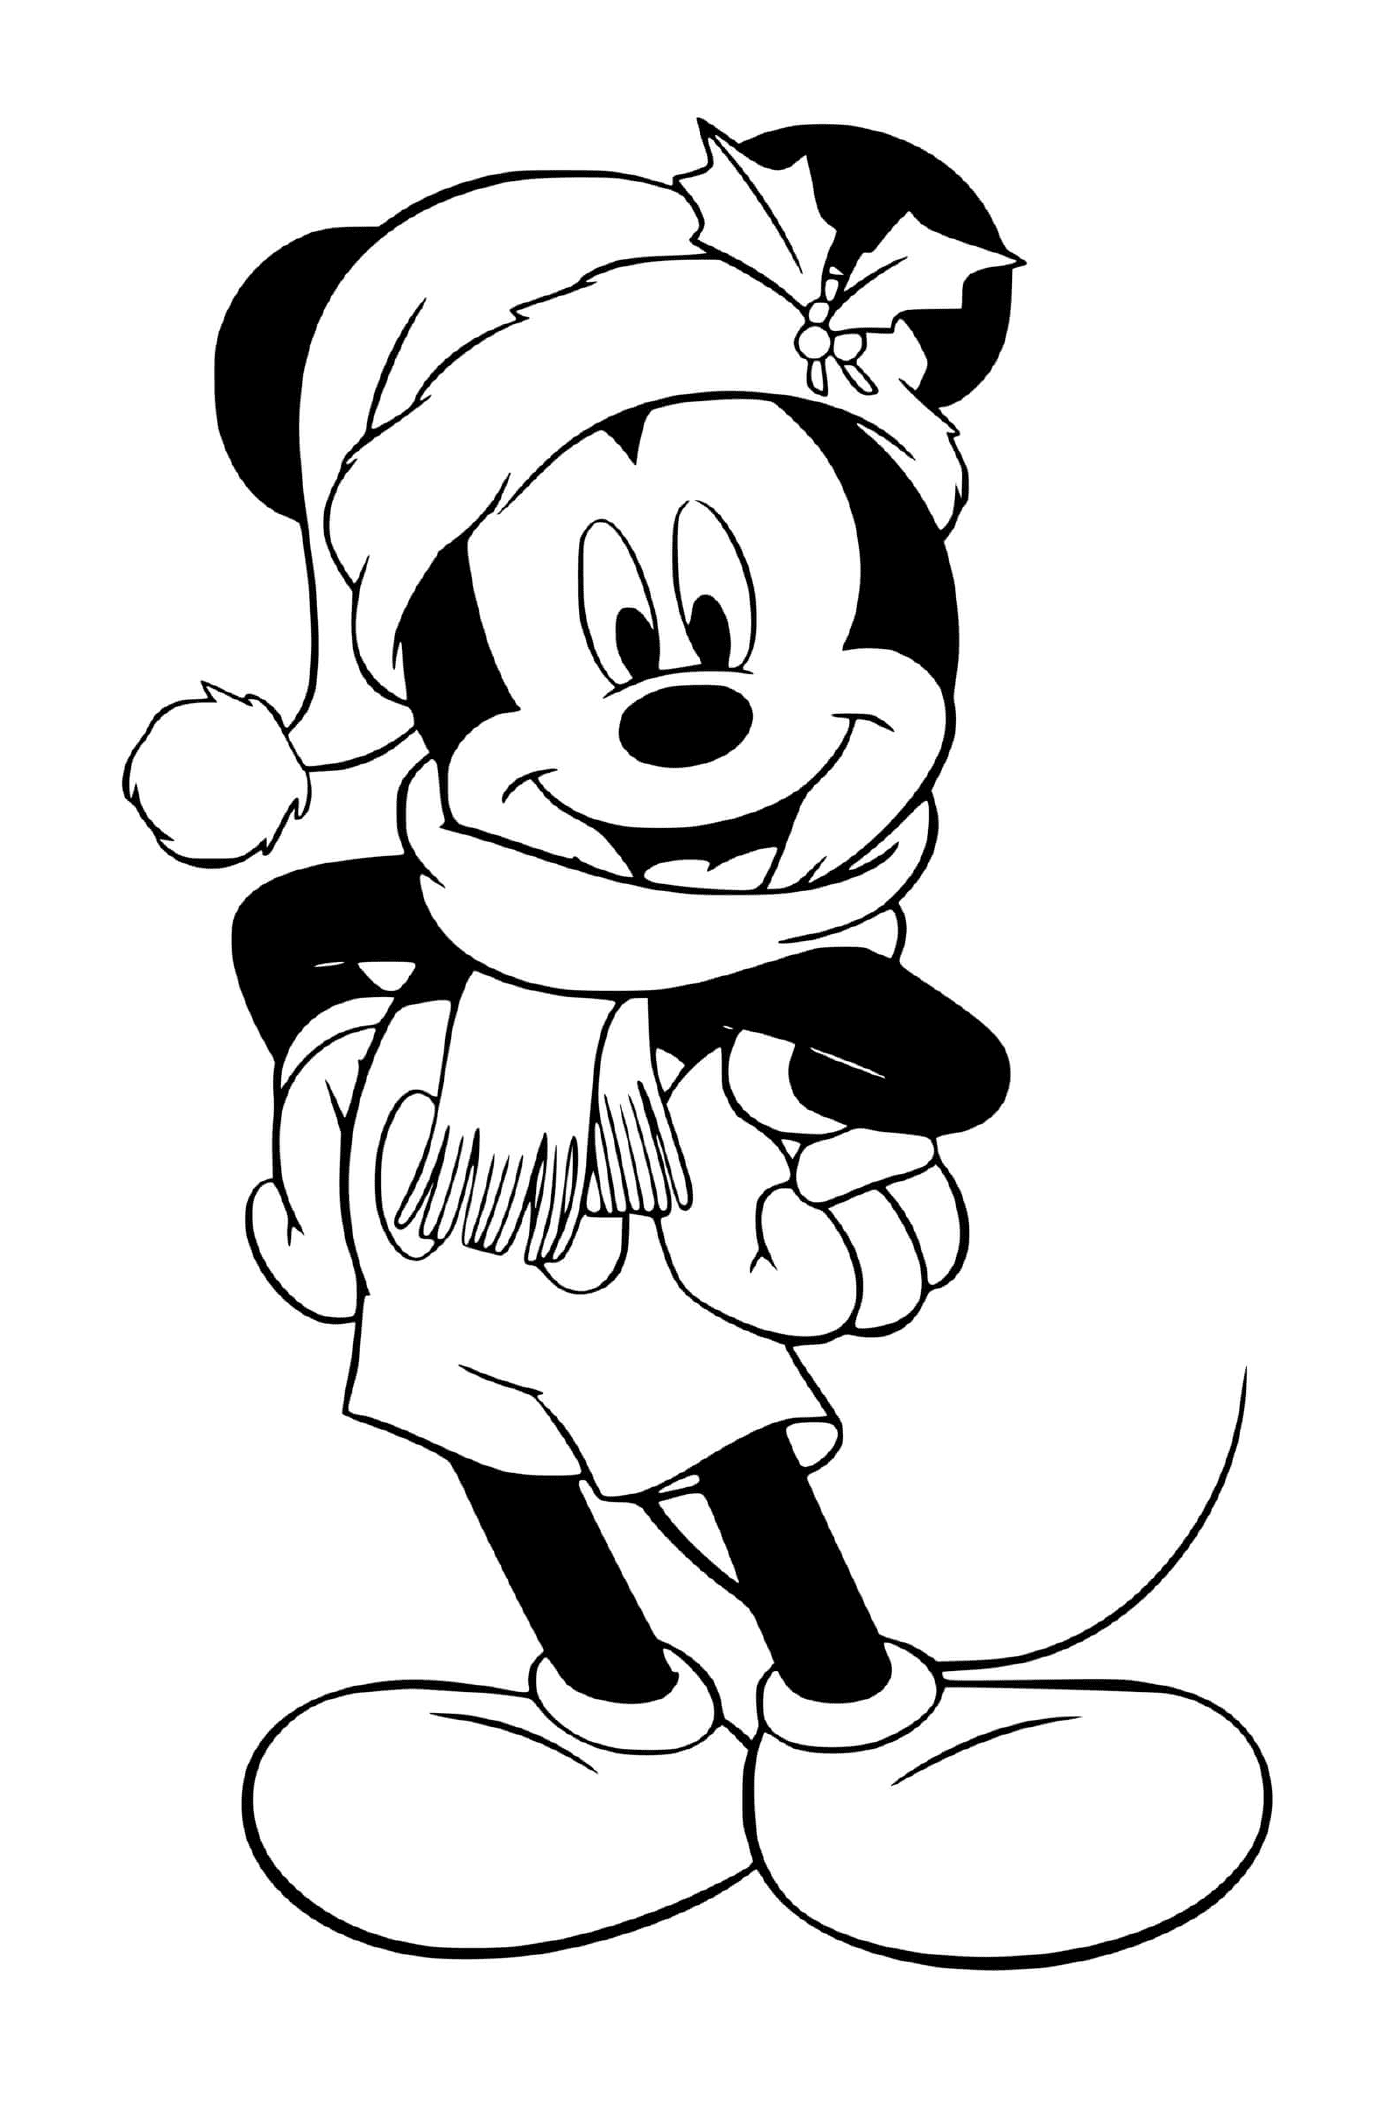  Mickey with a Santa's hat 